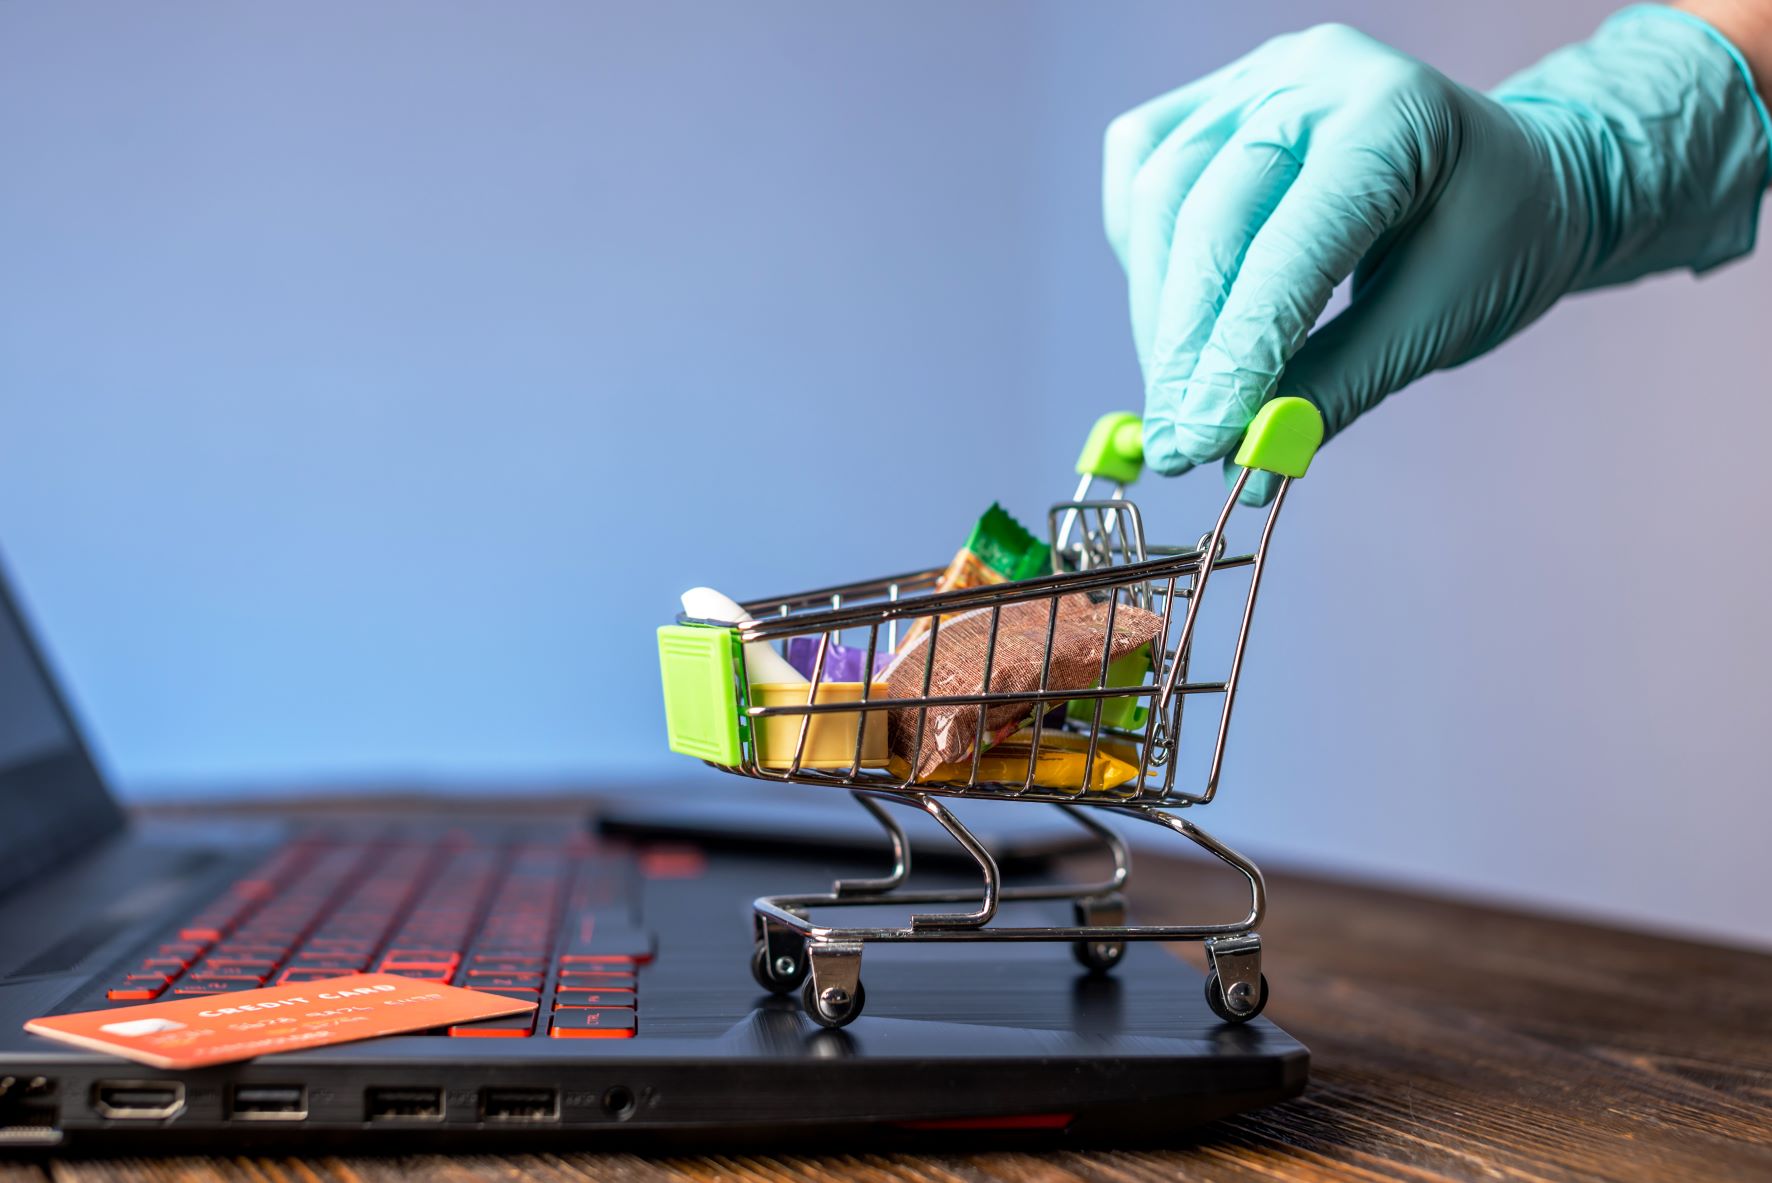 How did the COVID-19 pandemic change ecommerce?